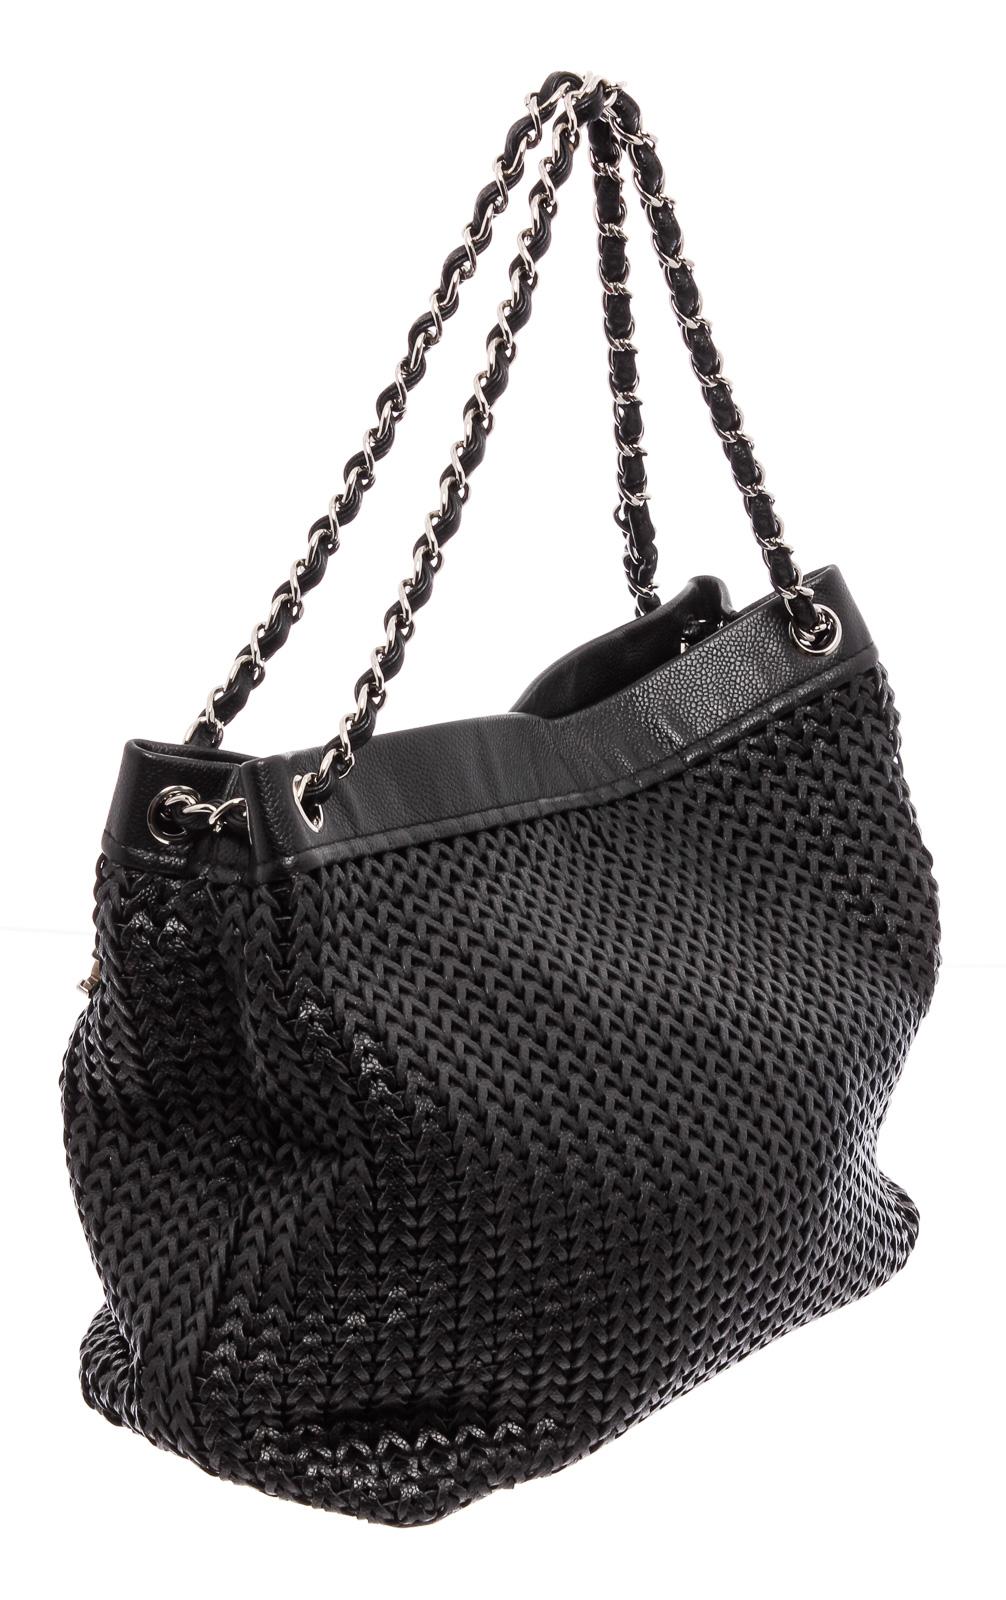 Soft woven leather with twin silver and black leather shoulder straps. Includes a magnetic snap closure and silver CC pendant, as well as a zip pocket inside the black 